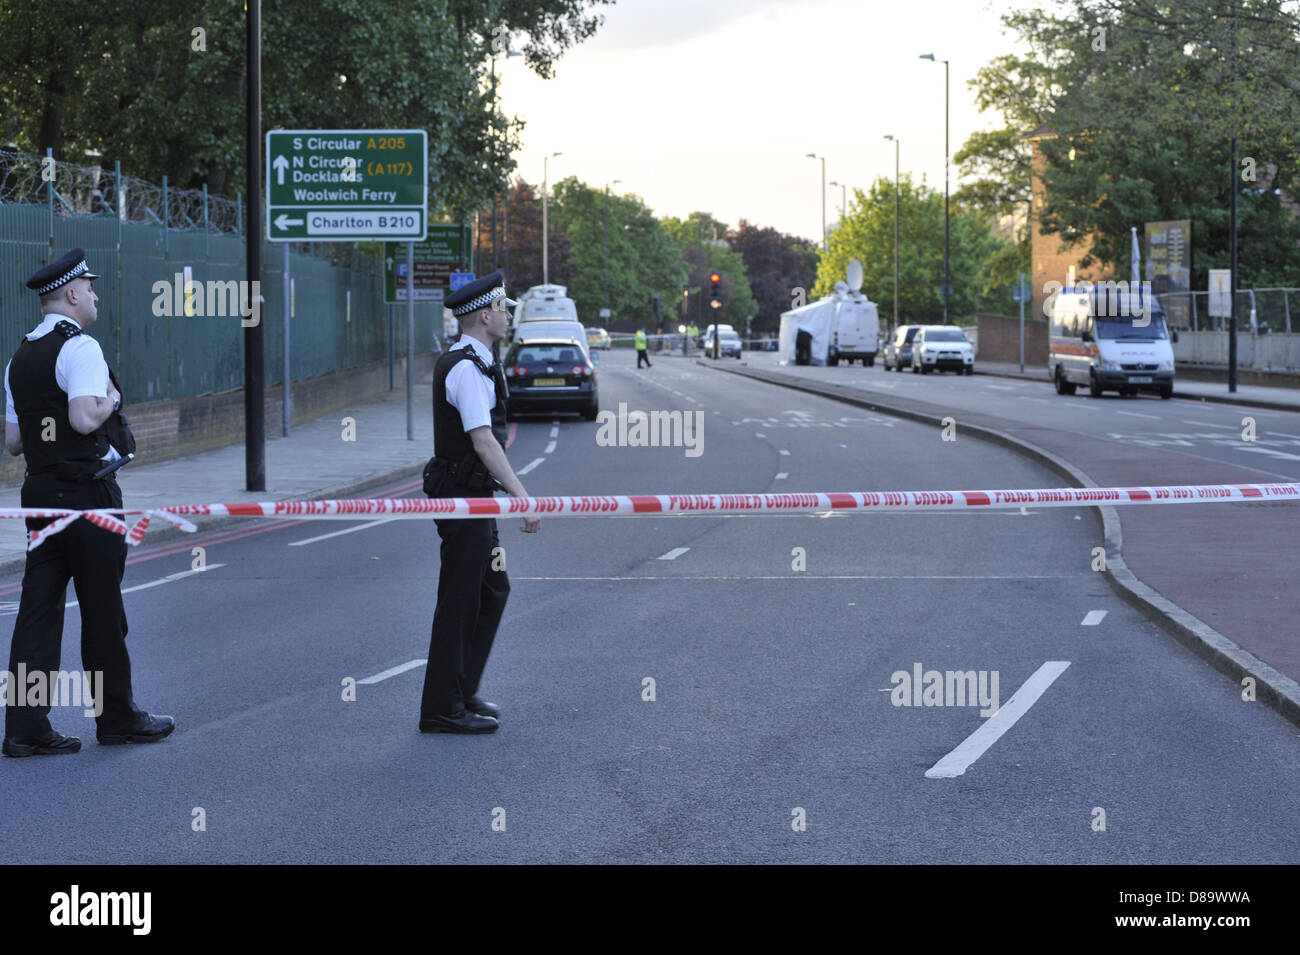 London, UK, 22nd May, 2013. This is the scene at John Wilson Street, Woolwich, a few hours after a man was killed by two suspects who in turn were both shot by police. The road has been cordoned off and a heavy police presence is in place. Credit: Lee Thomas/Alamy Live News Stock Photo